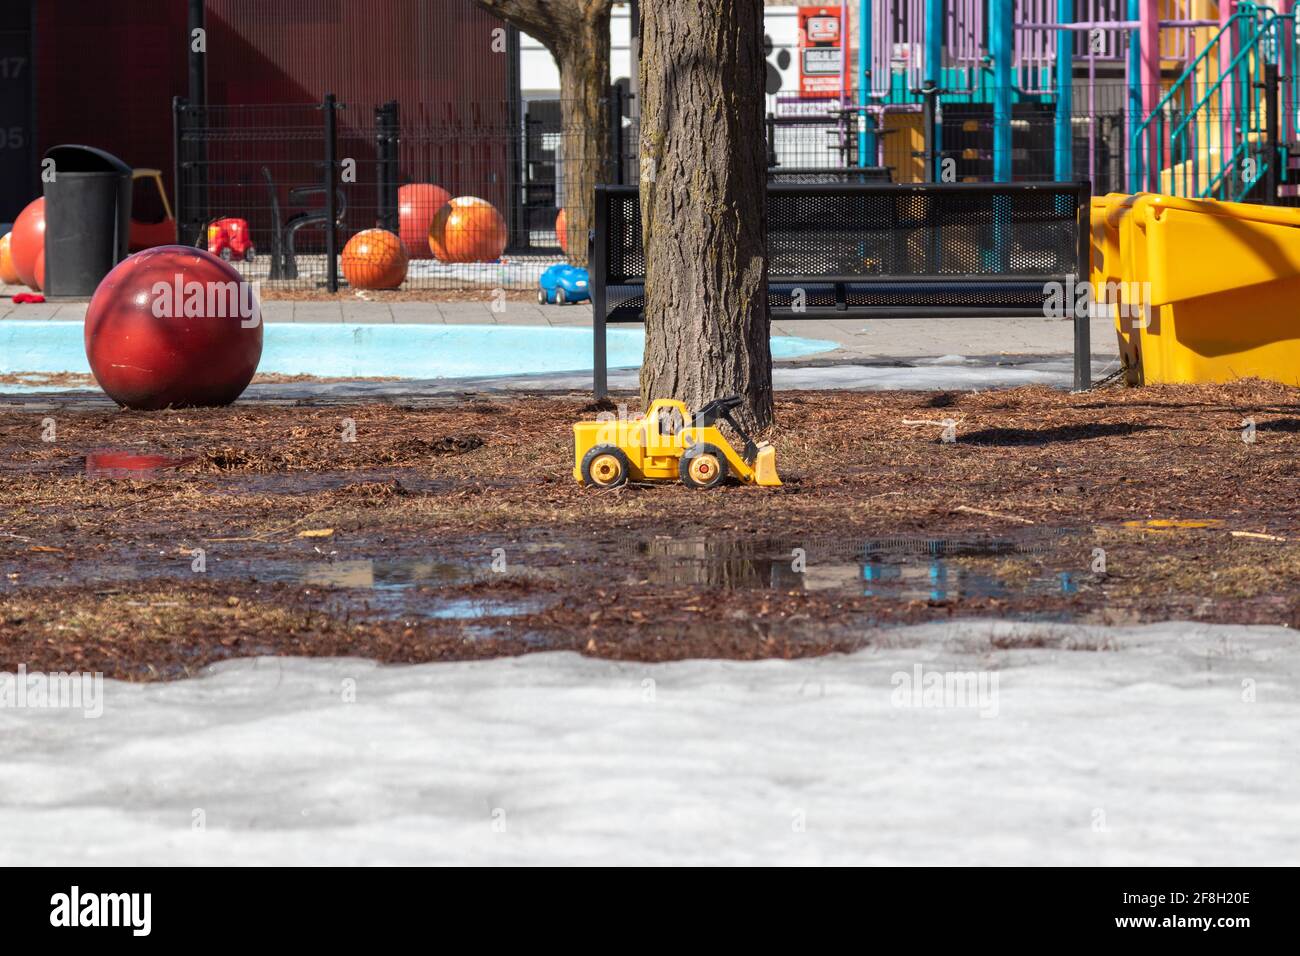 A yellow truck left behind when all parks were closed in March 2020 due to the pandemic - Ottawa, Ontario, Canada Stock Photo